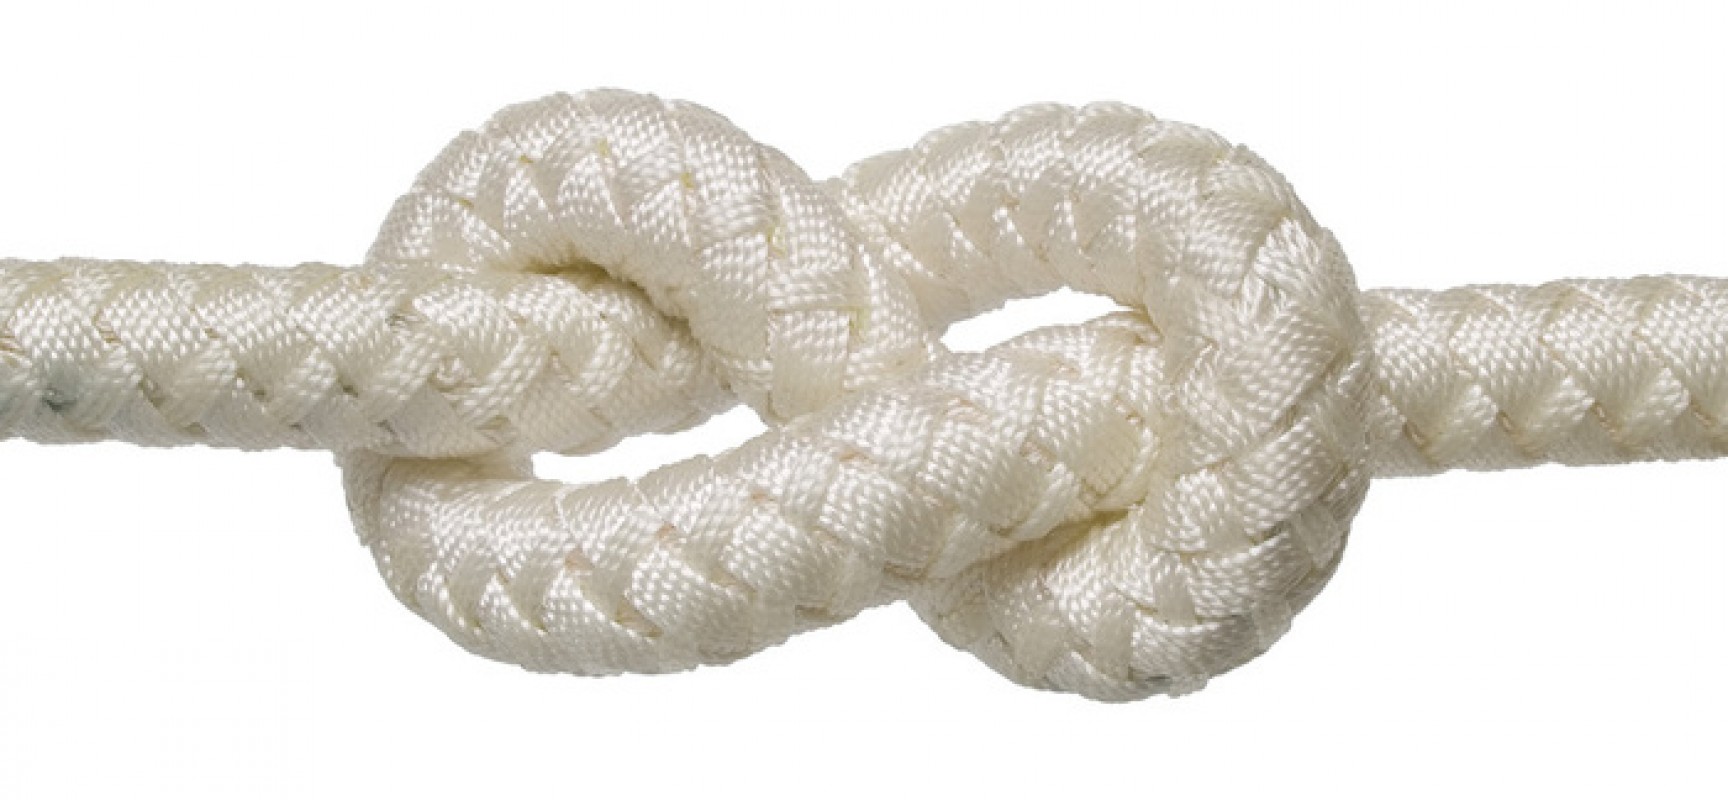 muscle knots cause pain, stress
                              waived helps reduce knots and pain